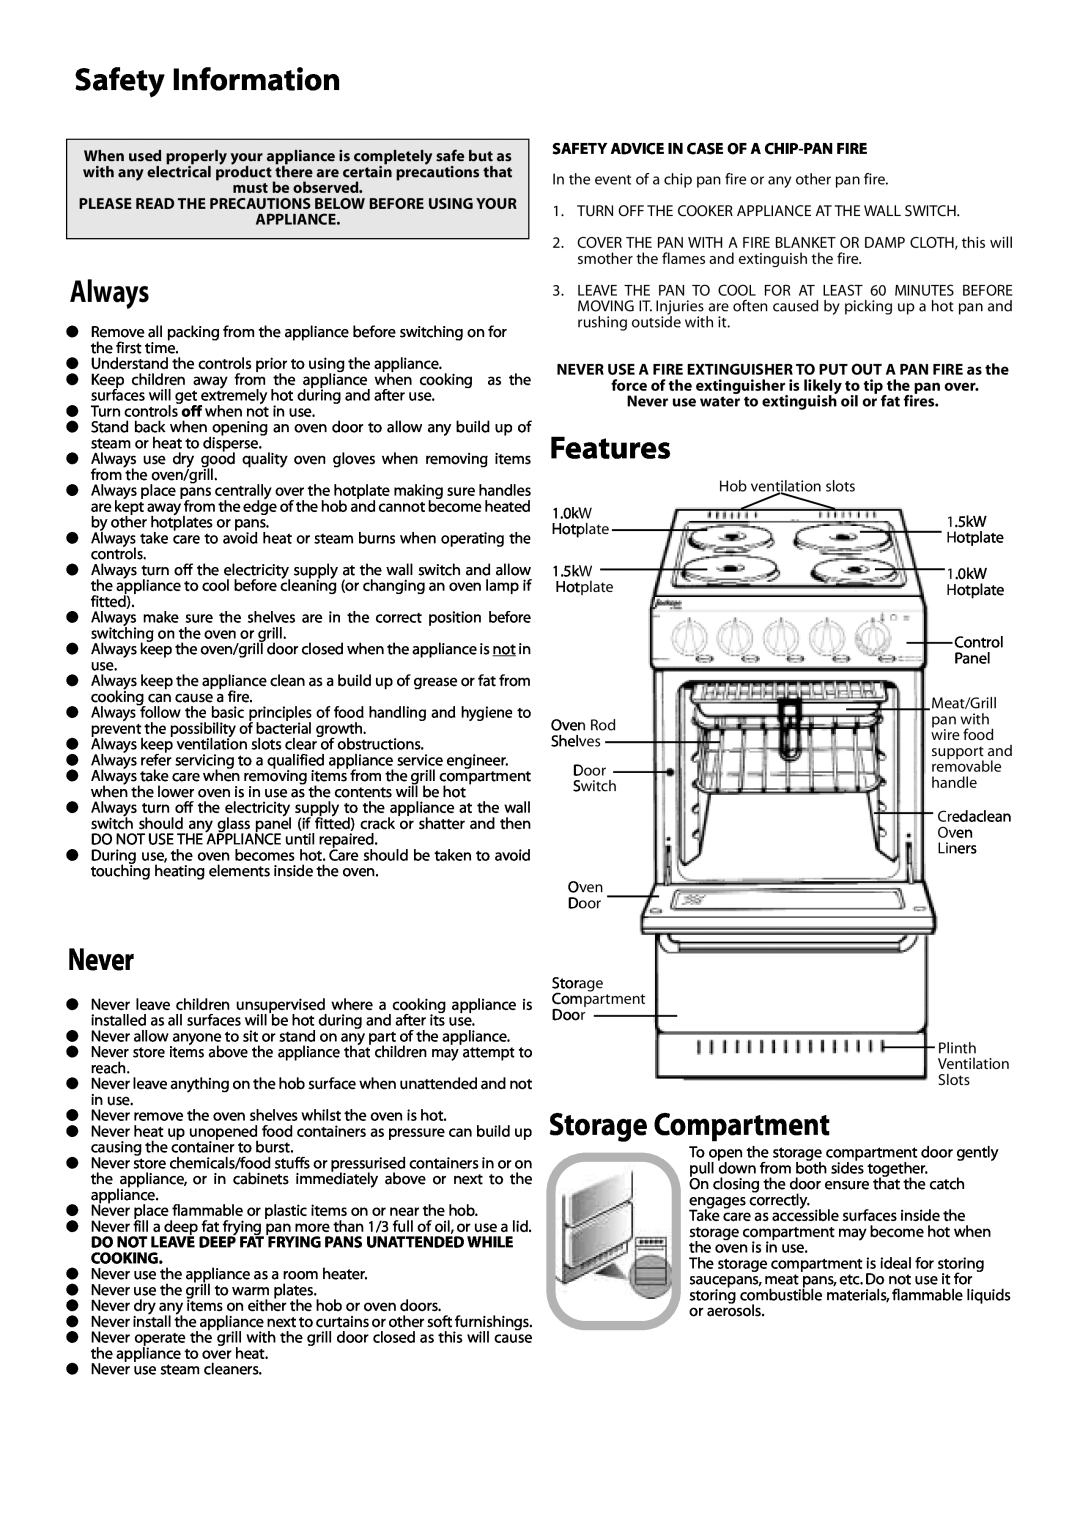 Jackson J051E installation instructions Safety Information, Always, Never, Features, Storage Compartment 